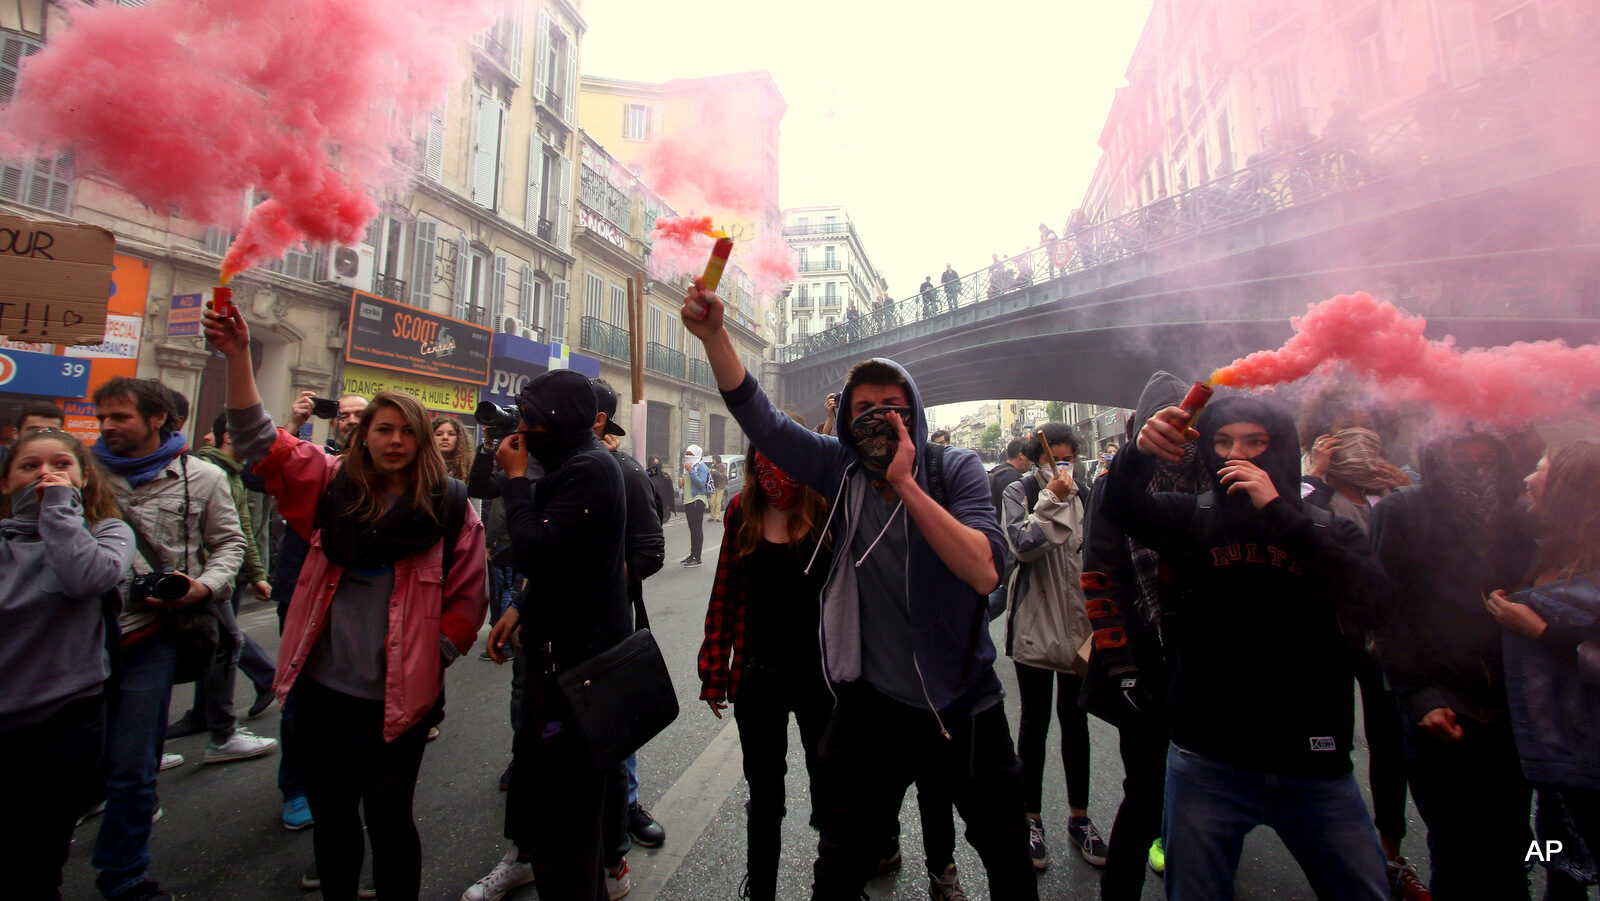 Students burn flares and shout slogans during a demonstration in Marseille, southern France, Thursday, April 28, 2016, during a nationwide day of protest. Student organizations and employee unions have joined to call for protests across France to reject a government reform relaxing the 35-hour working week and other labour rules.(AP Photo/Claude Paris)